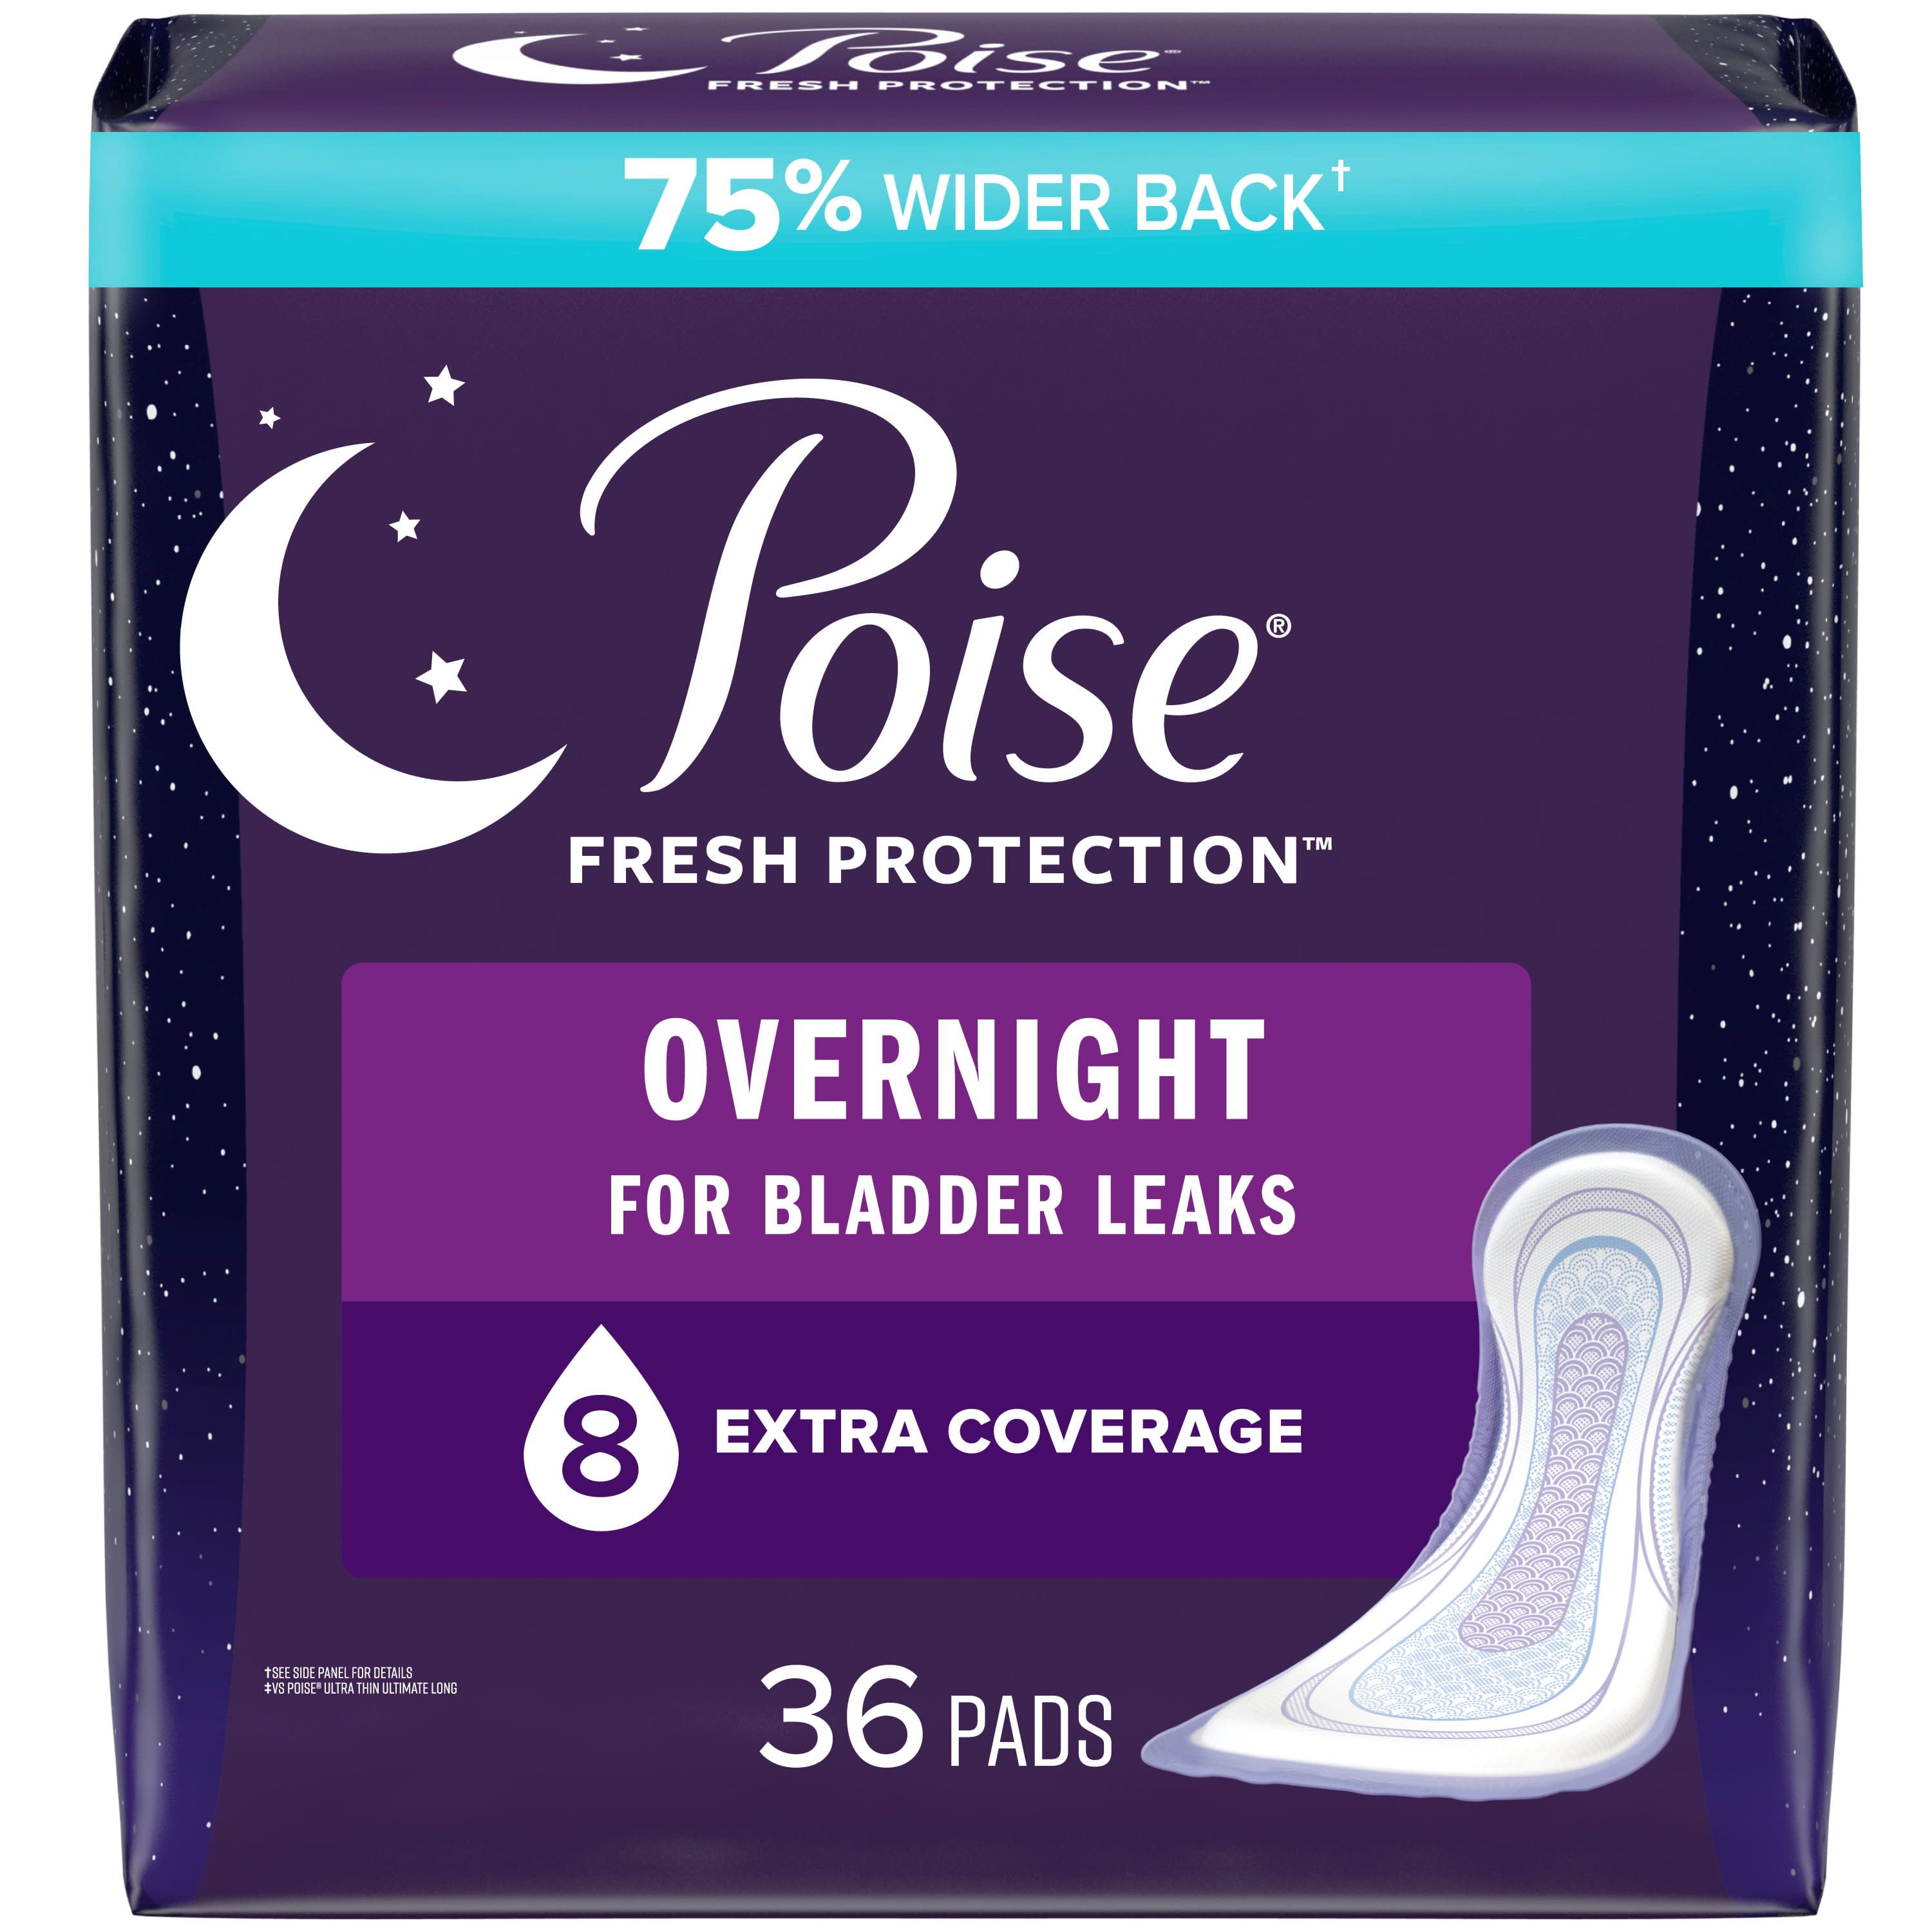 The best and worst incontinence pads from our tests